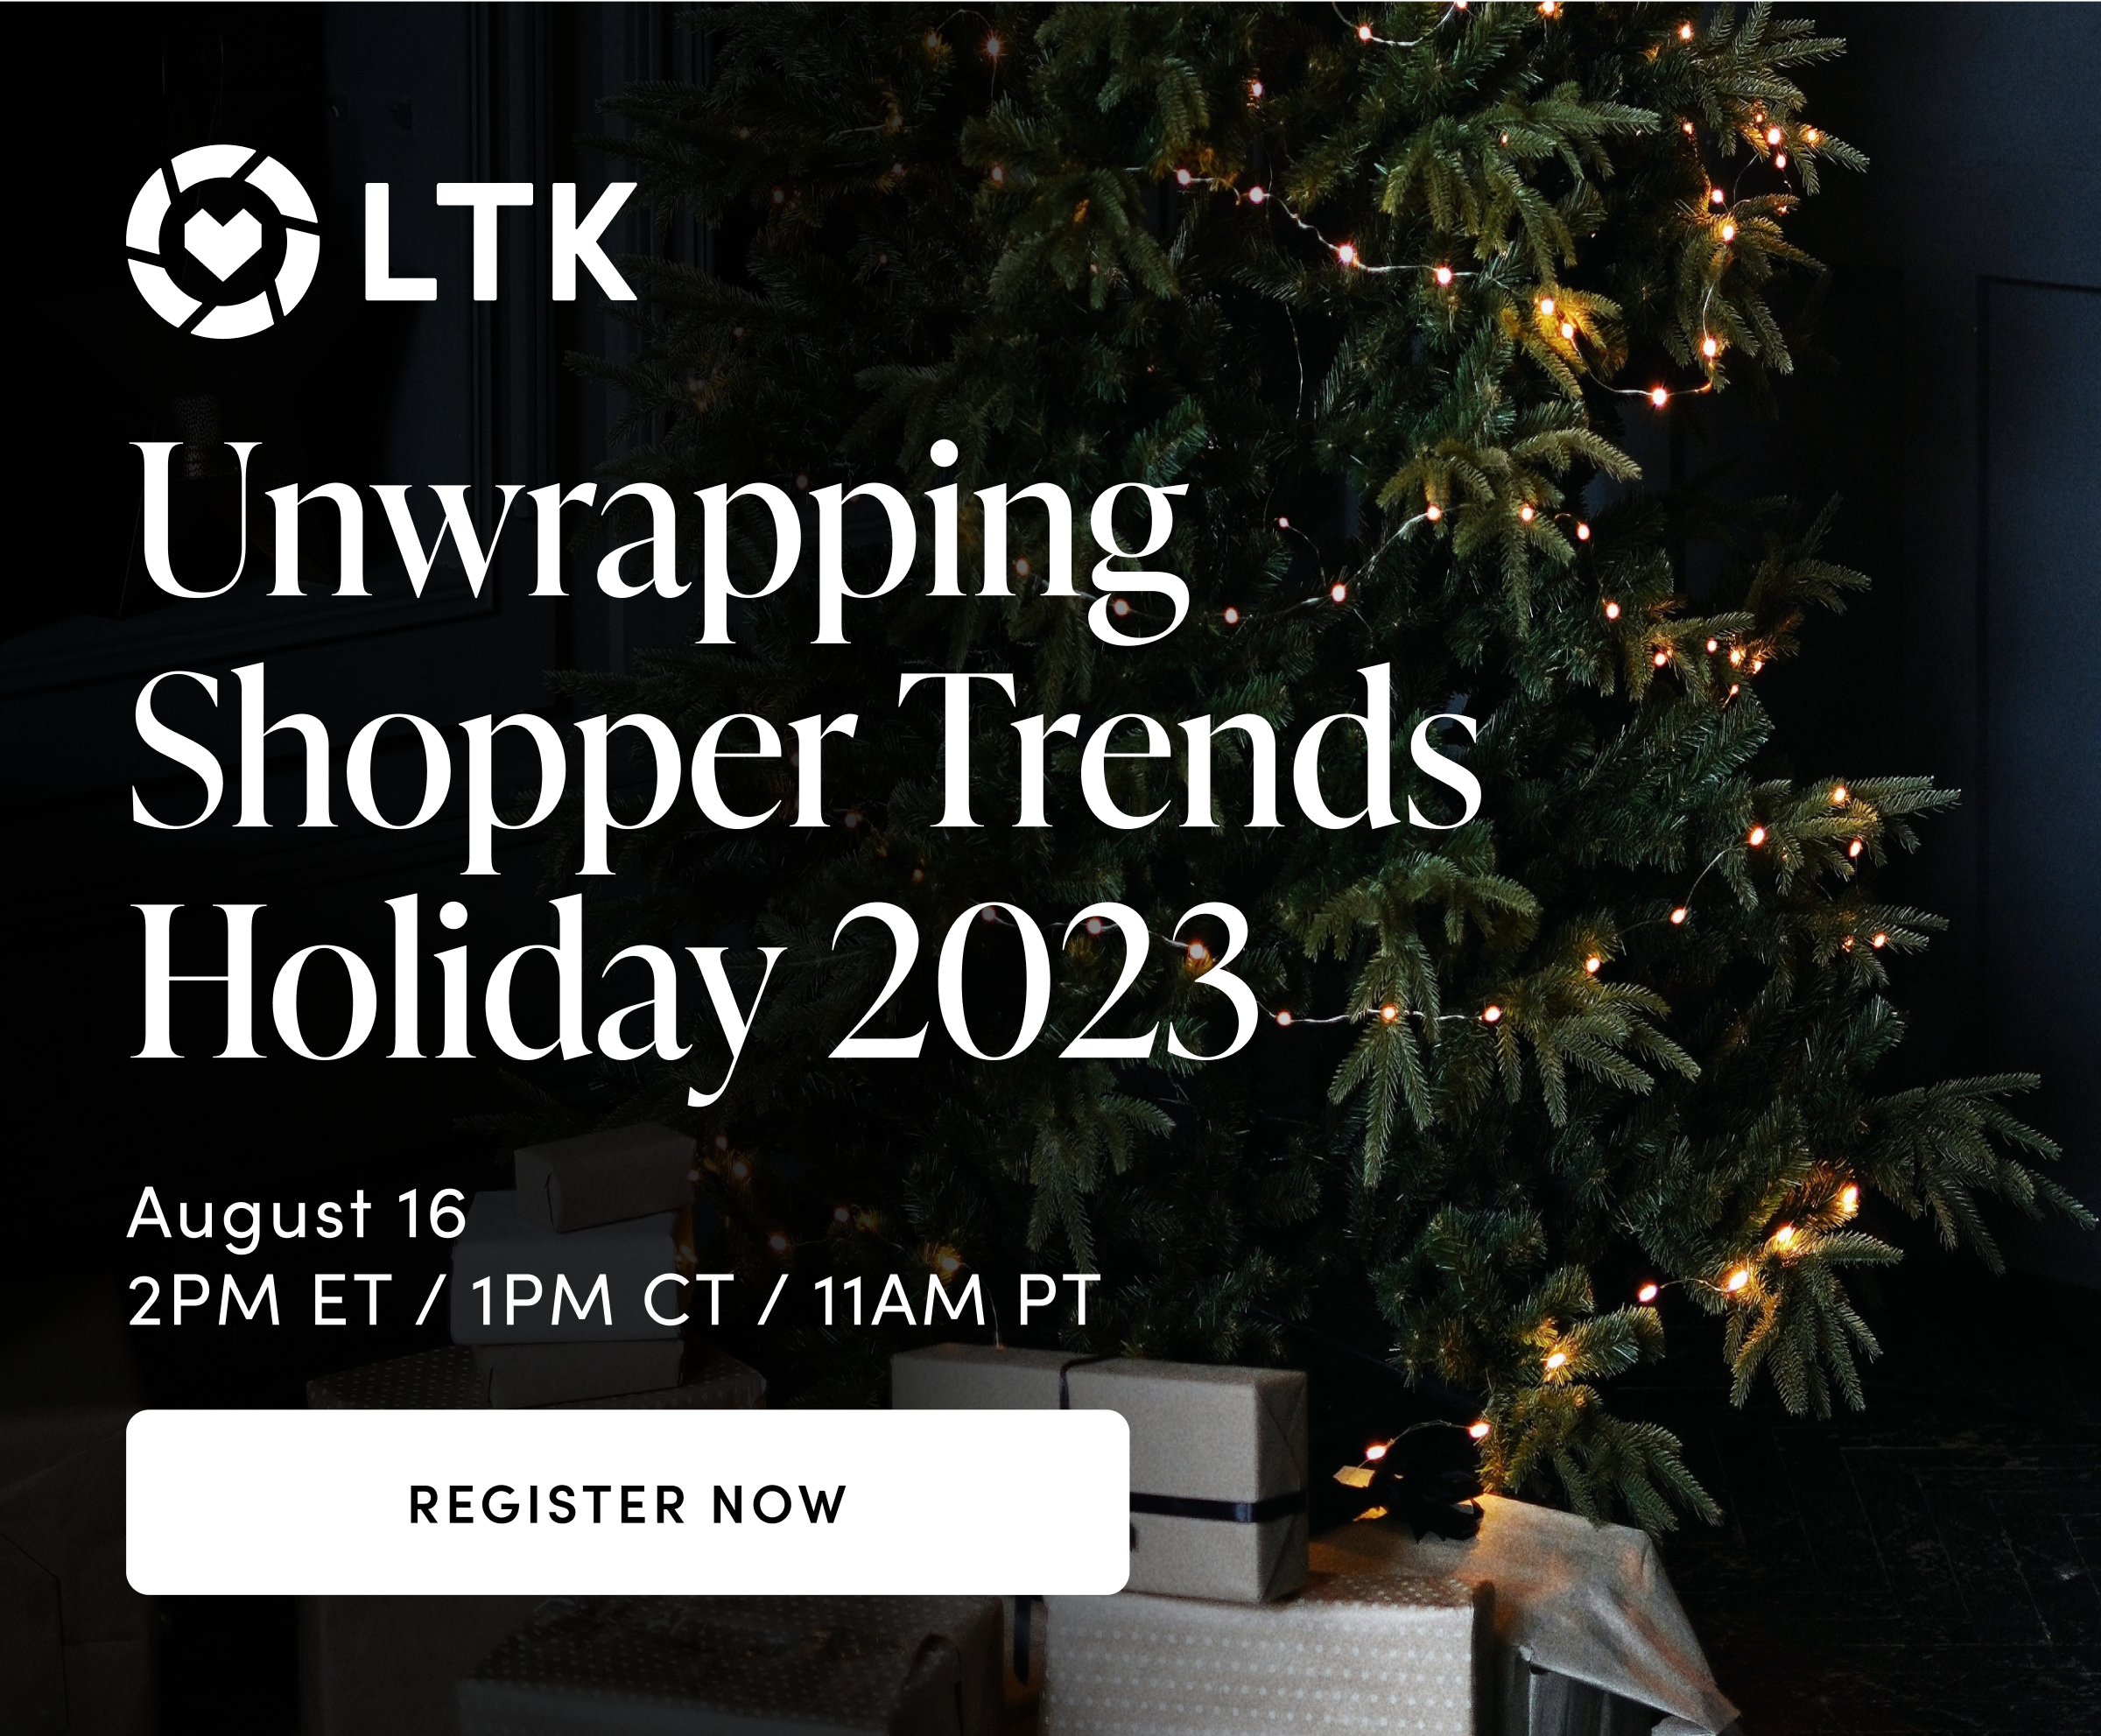 Unwrapping Shopper Trends Holiday 2023 - August 16 2PM ET / 1PM CT / 11AM PT - REGISTER NOW